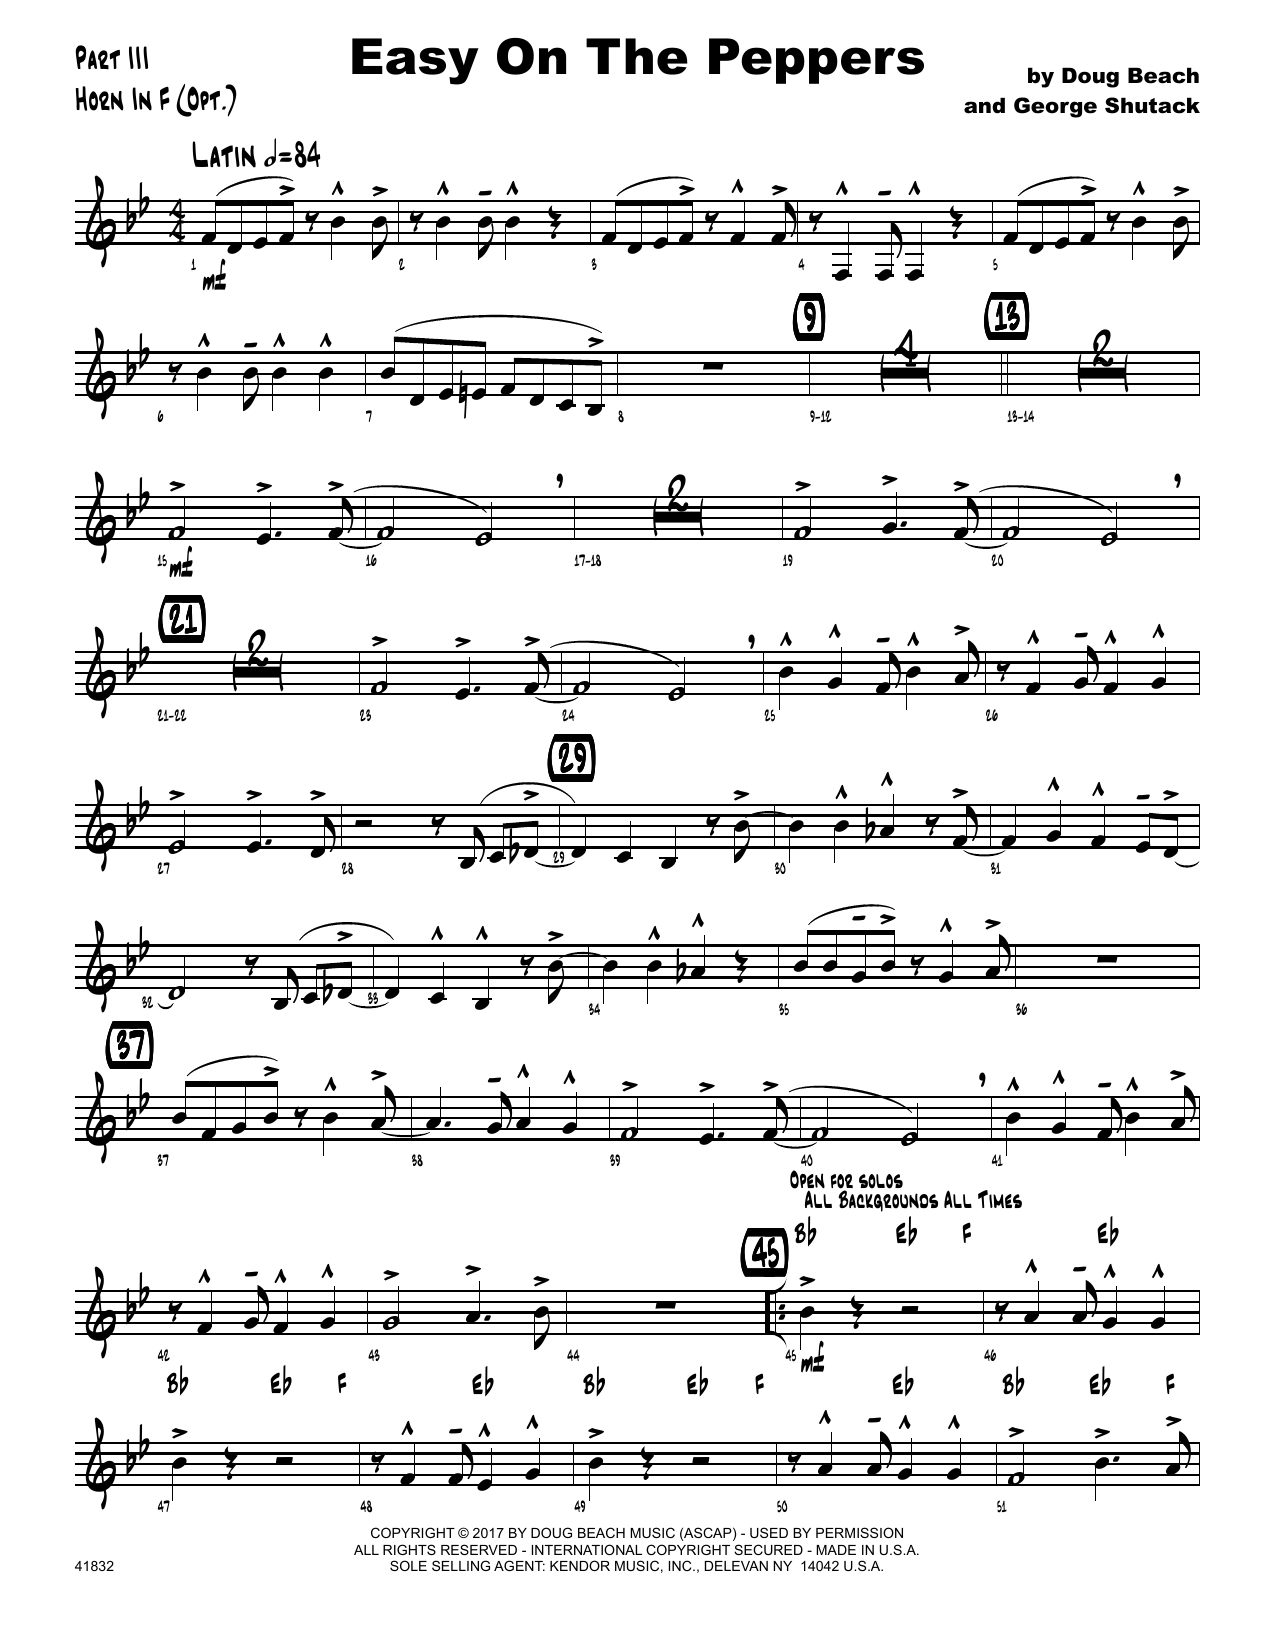 Download Doug Beach & George Shutack Easy On The Peppers - Horn in F Sheet Music